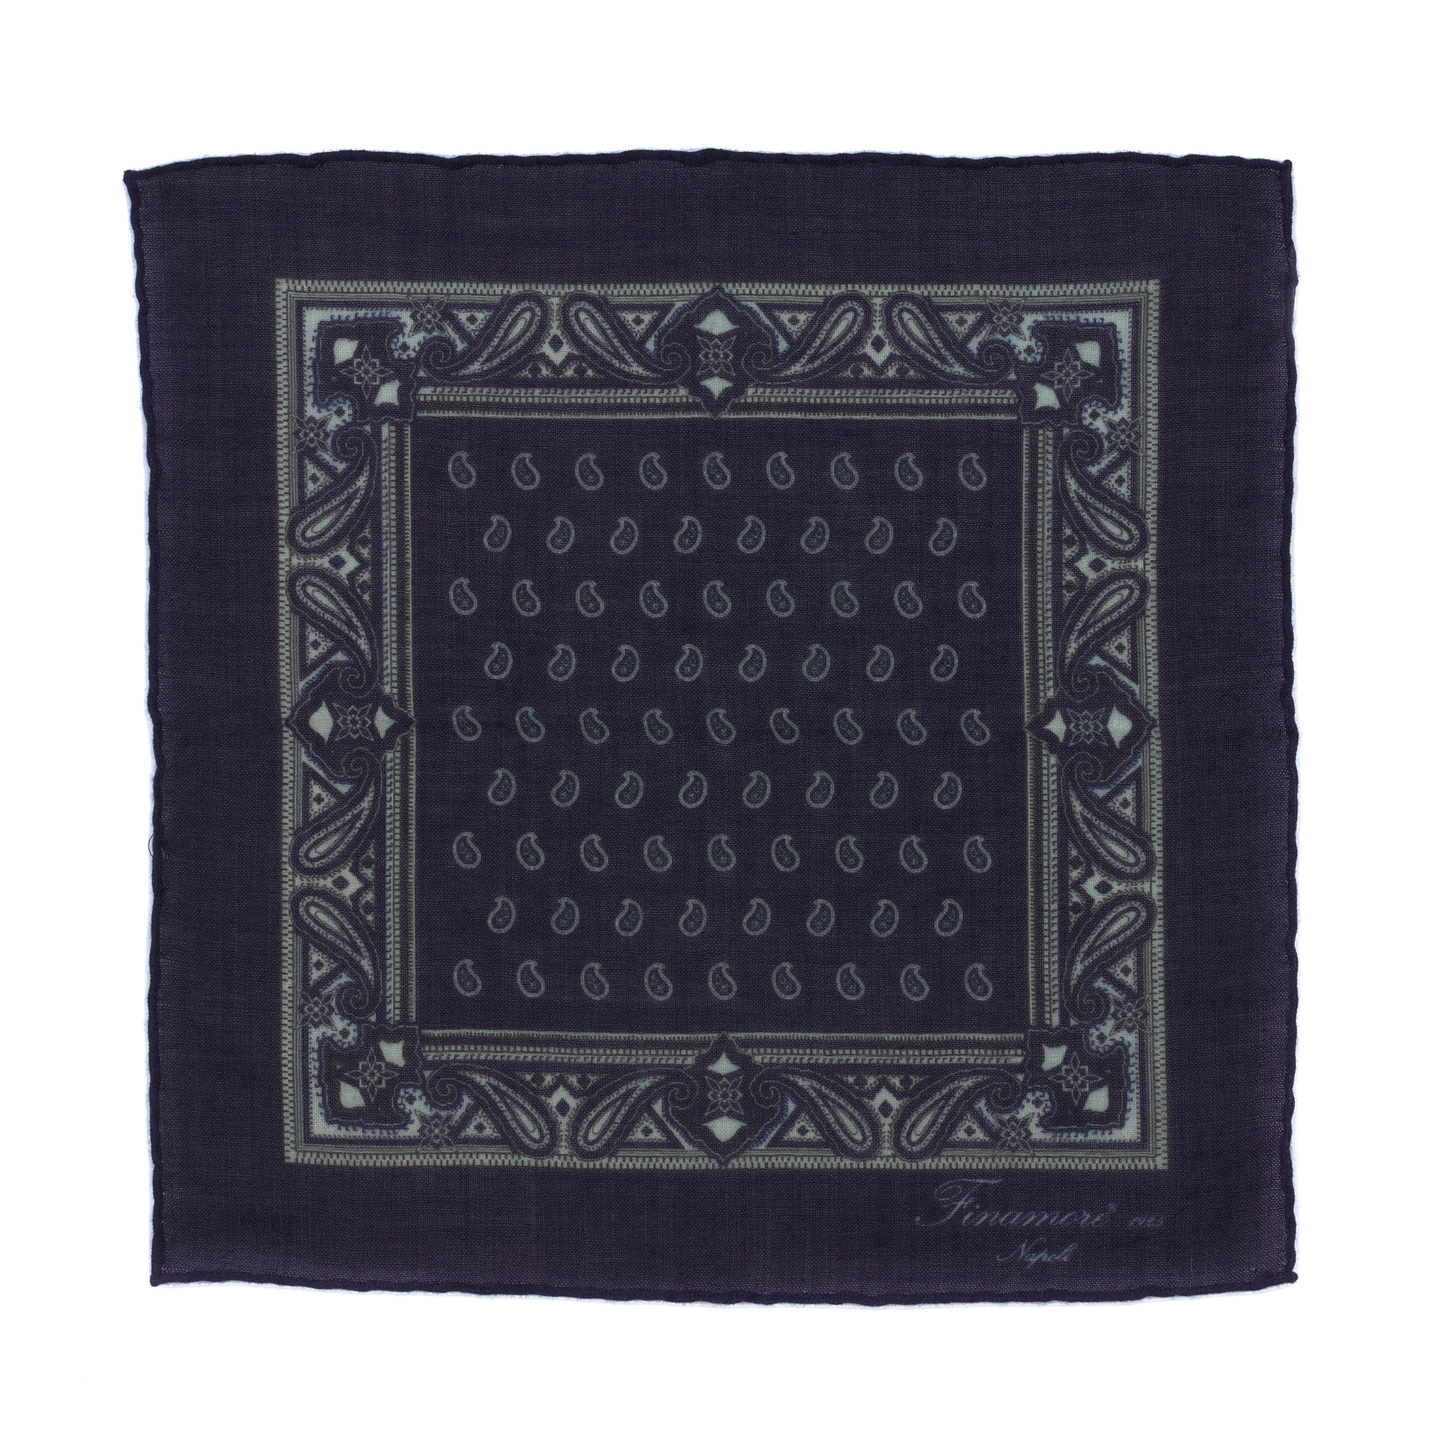 Paisley-Print wool and Cashmere-Blend Pocket Square